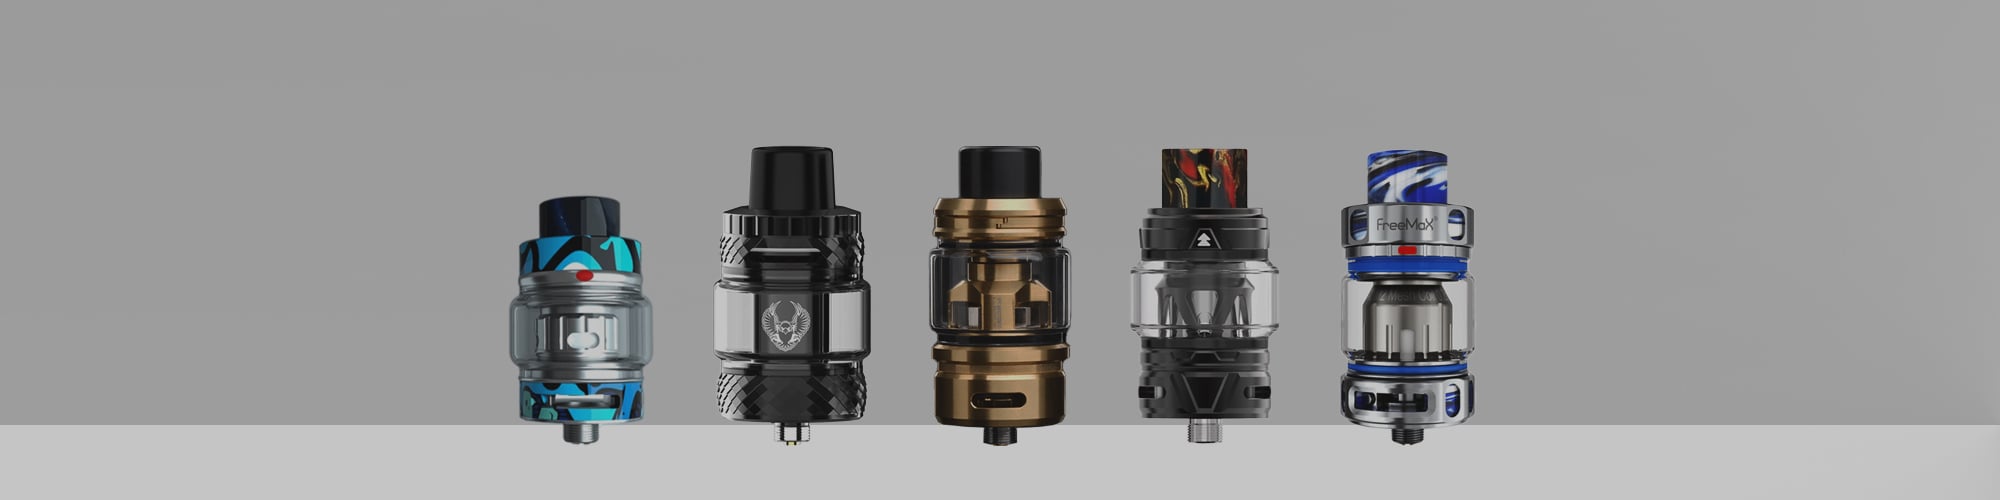 Best Sub Ohm Tanks Main Banner Updated